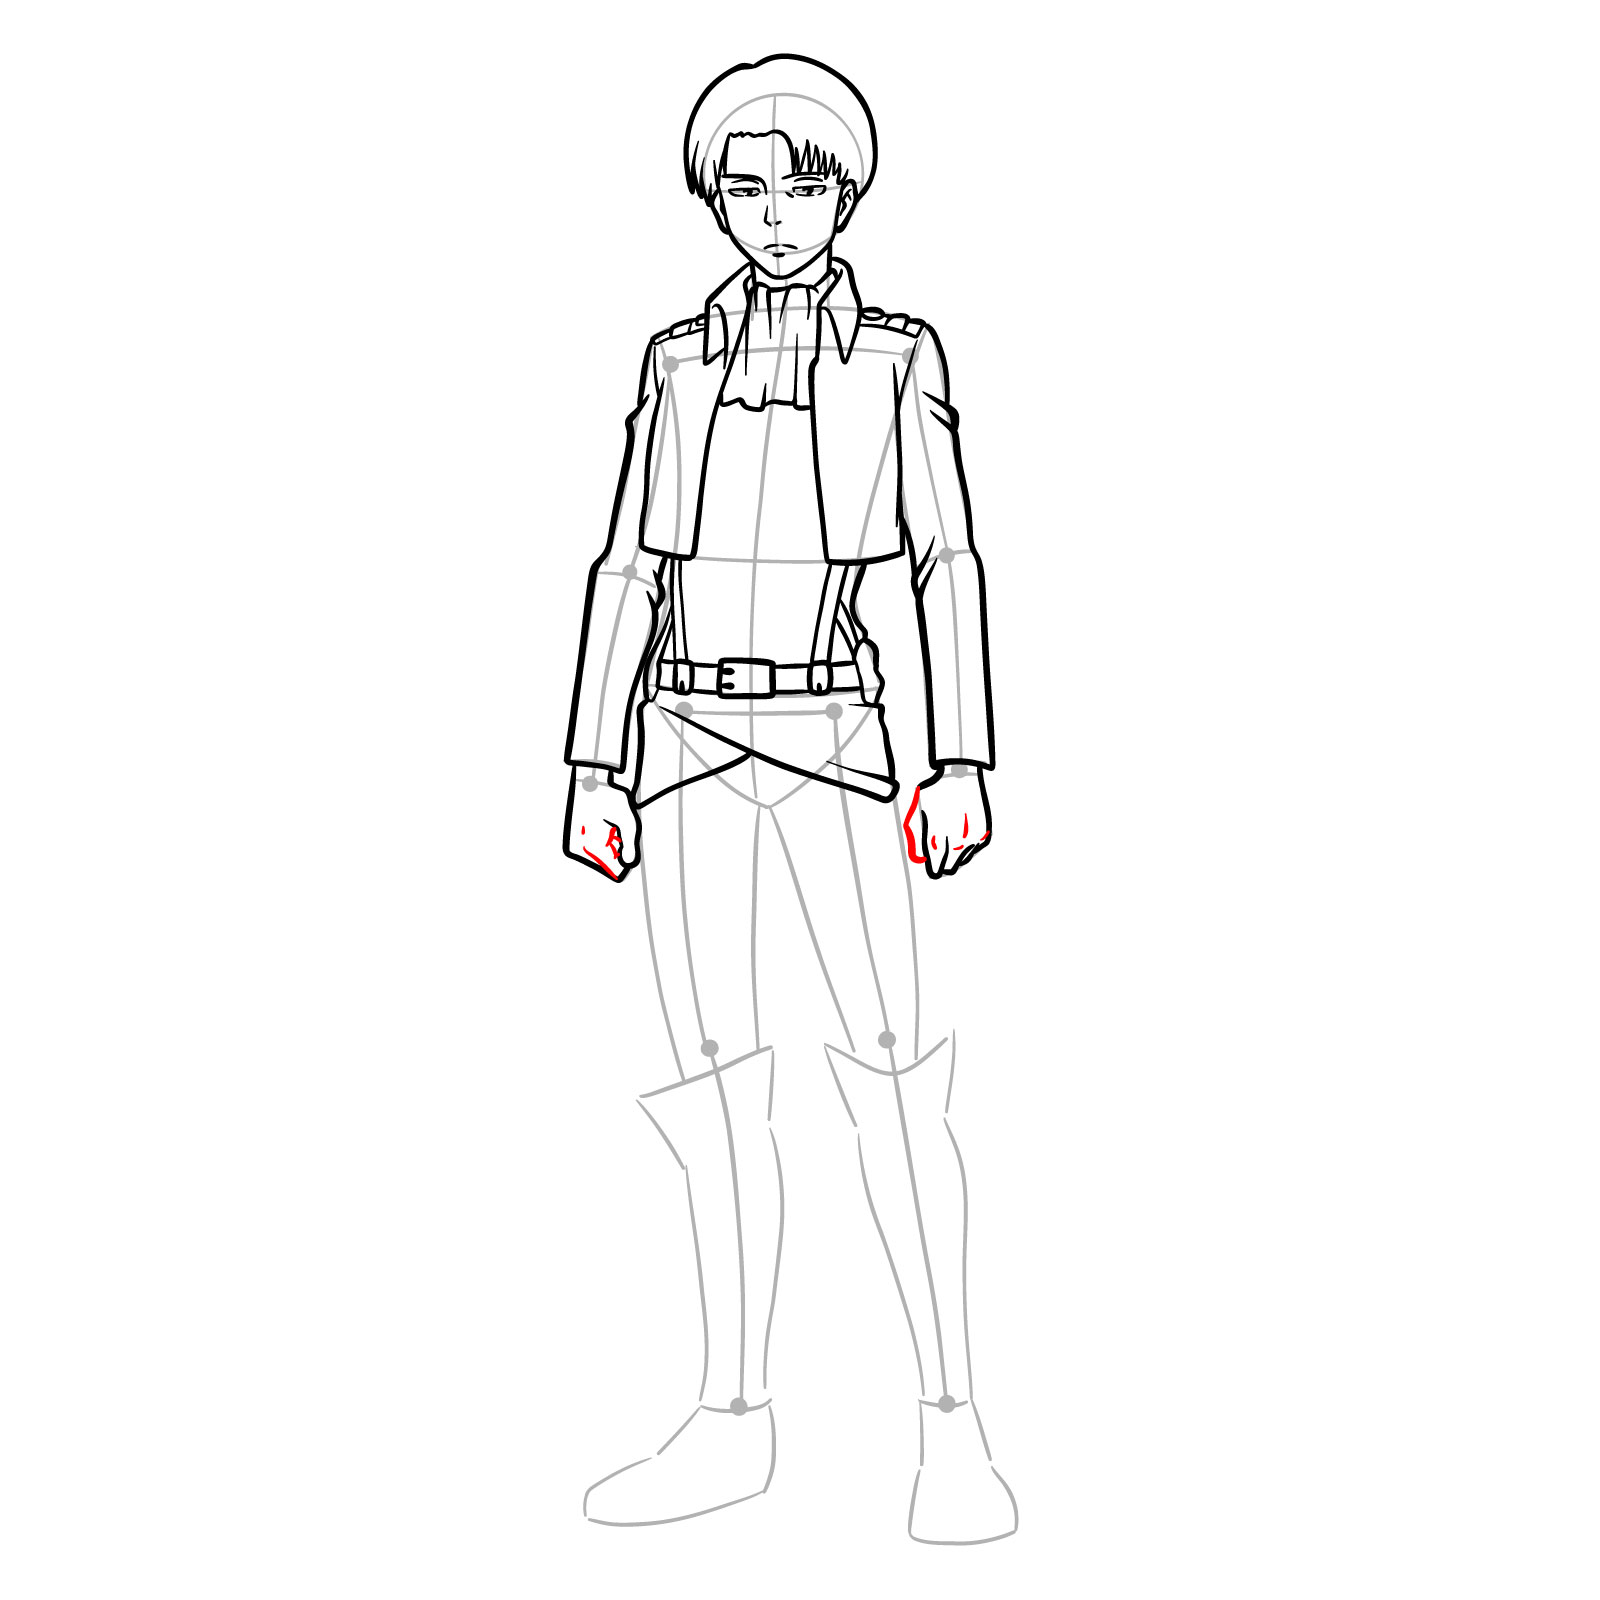 Step-by-step drawing guide for adding details to Captain Levi's hands - step 18